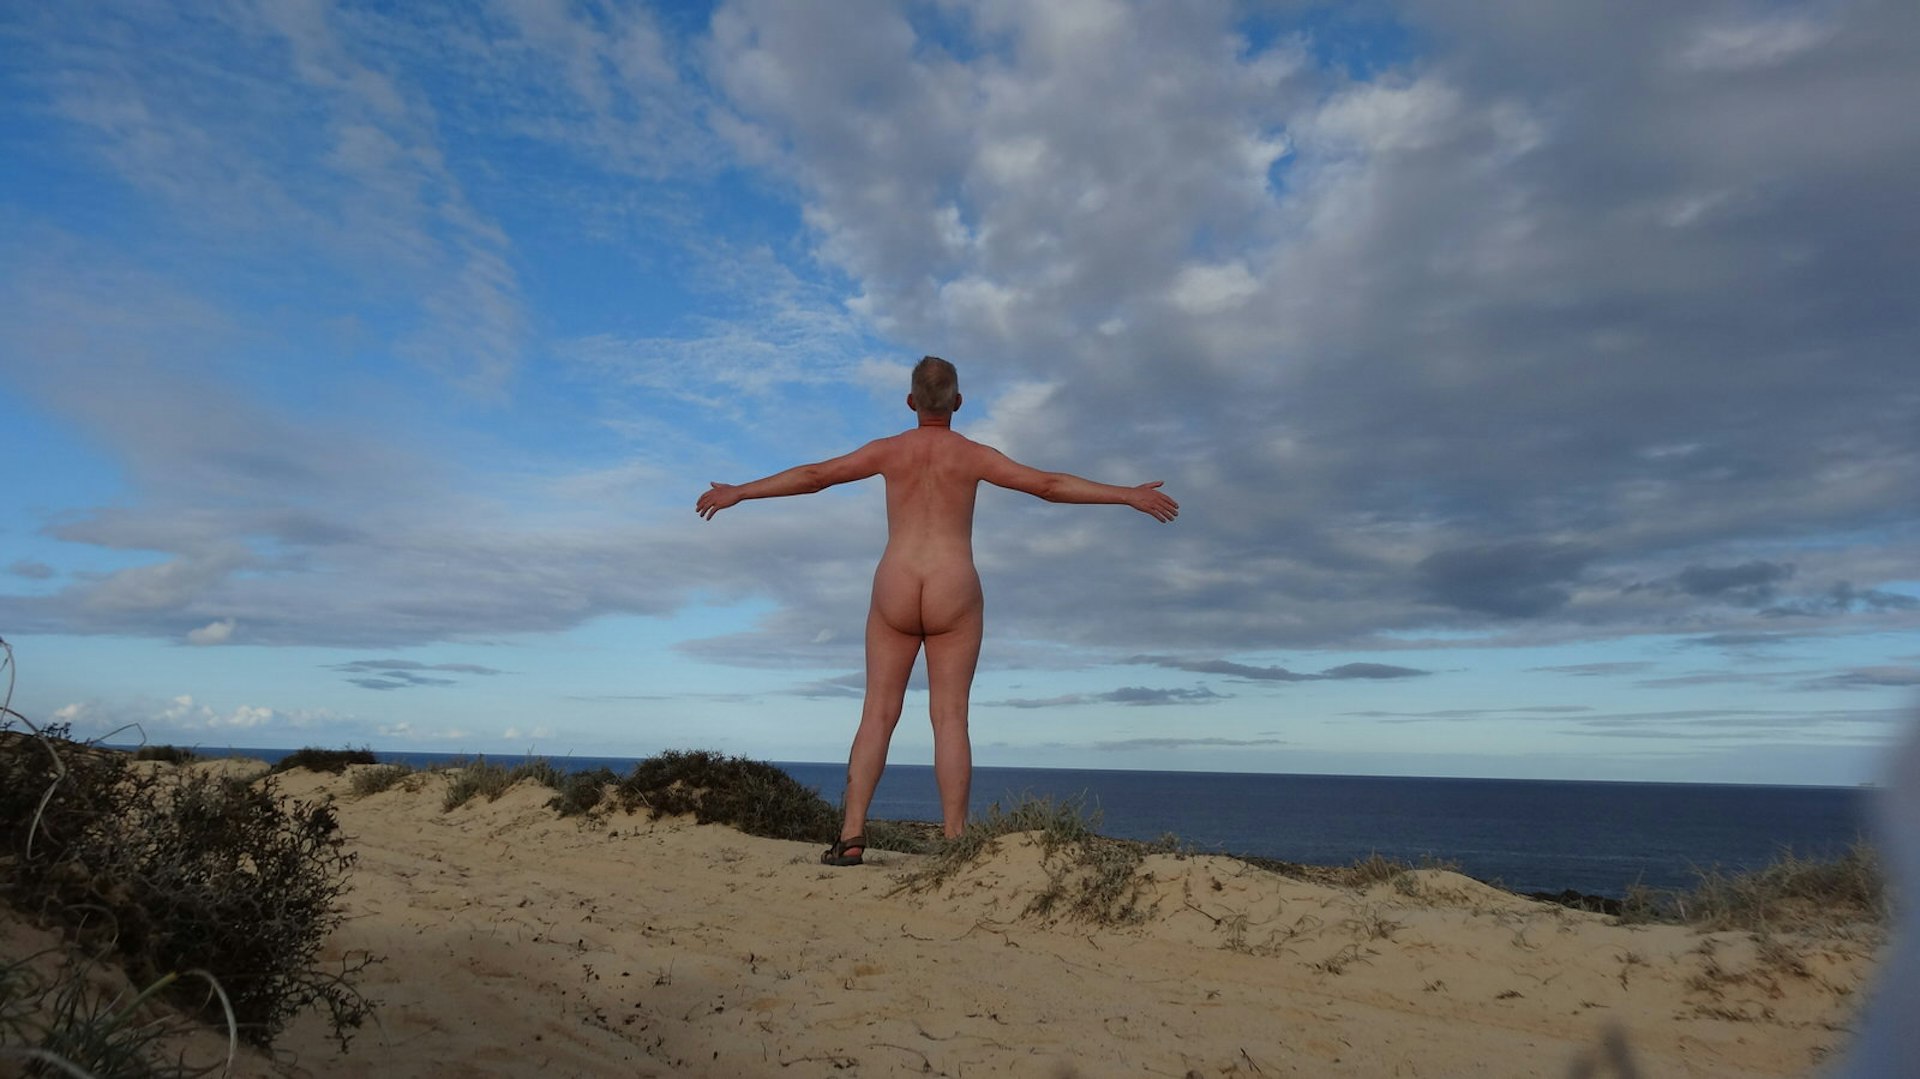 With arms raised by his side, a nude man stands atop a sandy dune on a nude beach and faces the not-too-distant sea; the blue sky above has a beautiful swirl of white and grey clouds